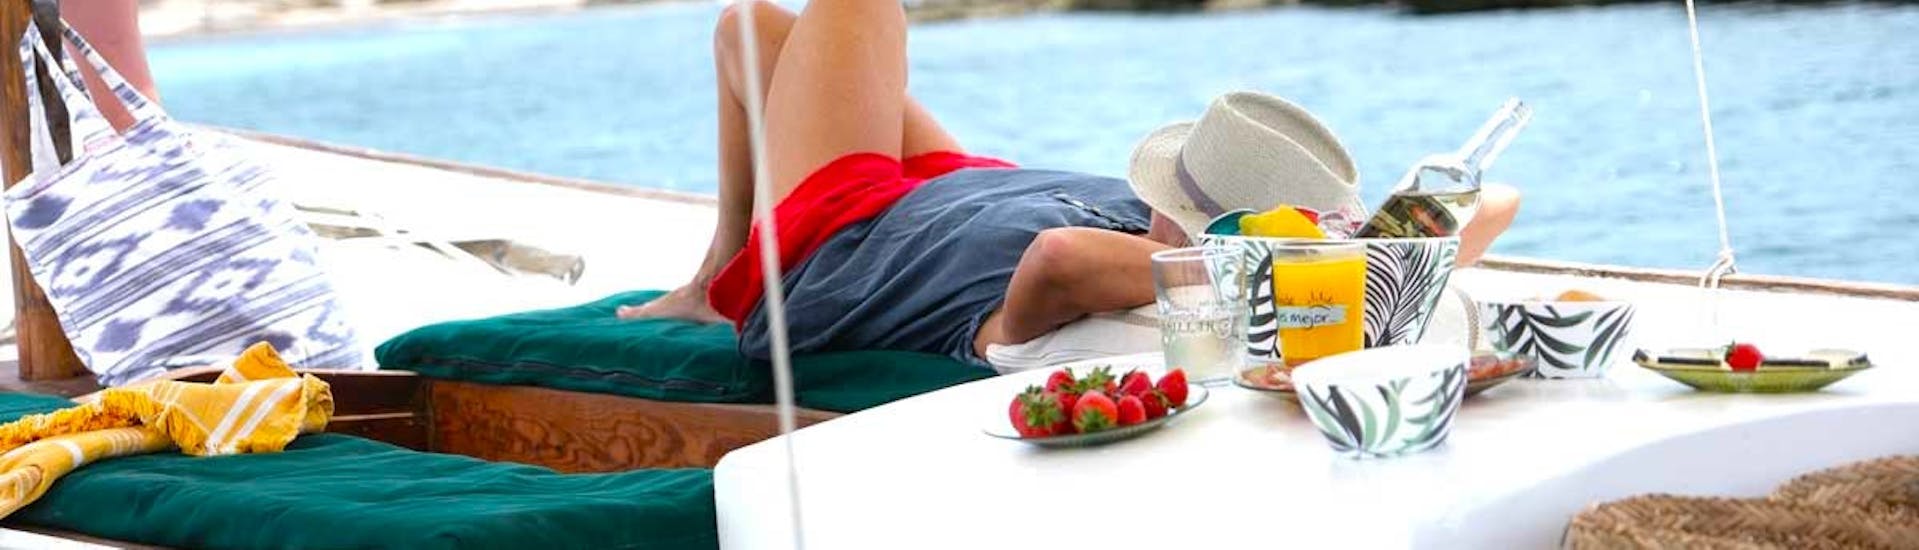 Man lying on the Rapita Charter Boat "Sol" during his private boat trip in Mallorca